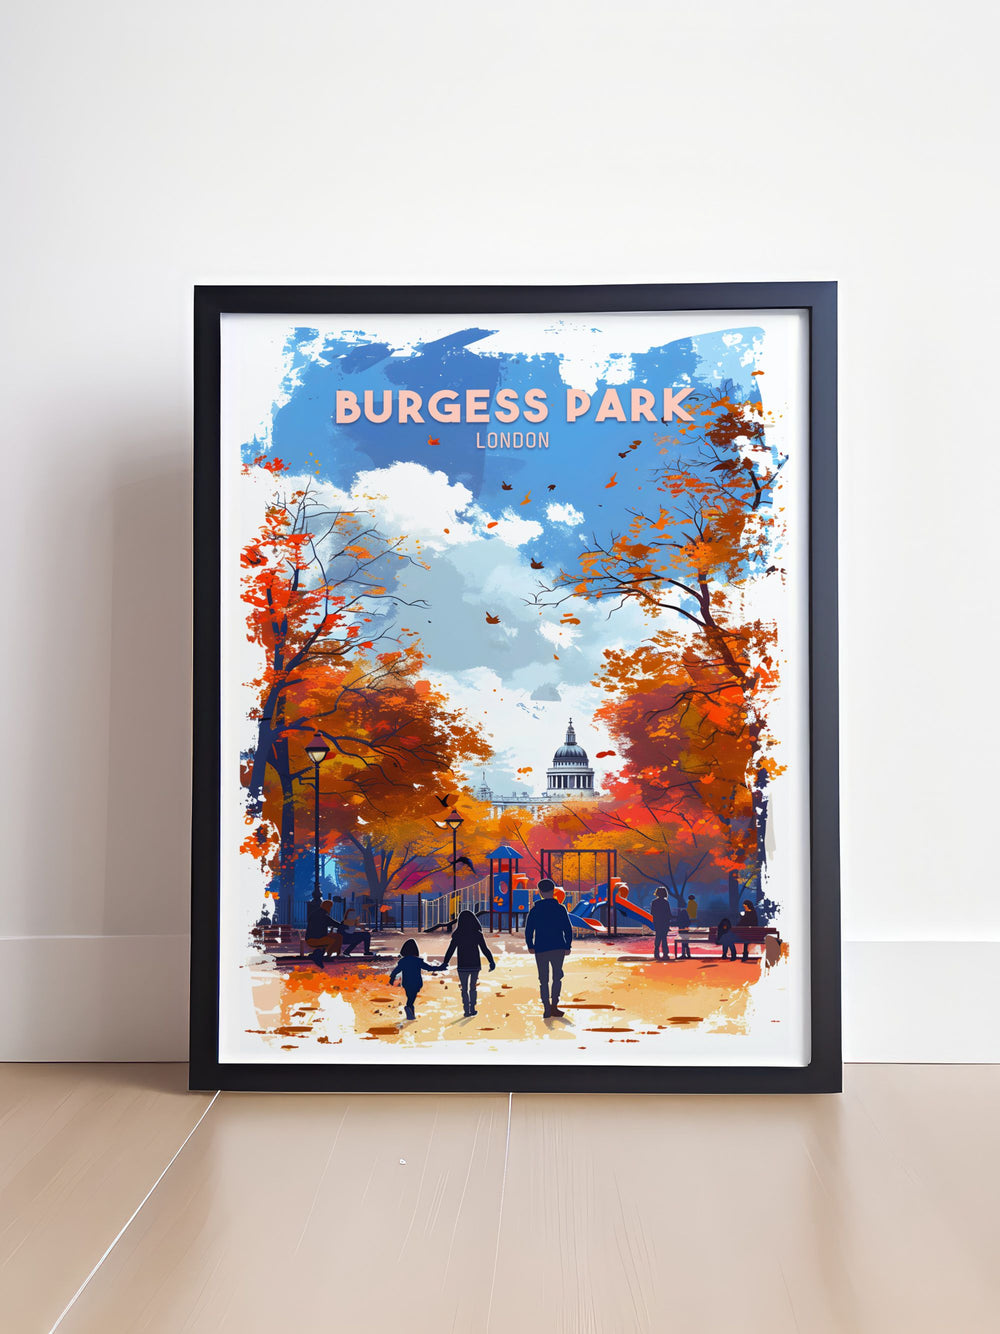 Beautiful framed art of Burgess Park Playground in South East London, highlighting the colorful and inviting play area set against the backdrop of mature trees and expansive lawns, ideal for any art collection.